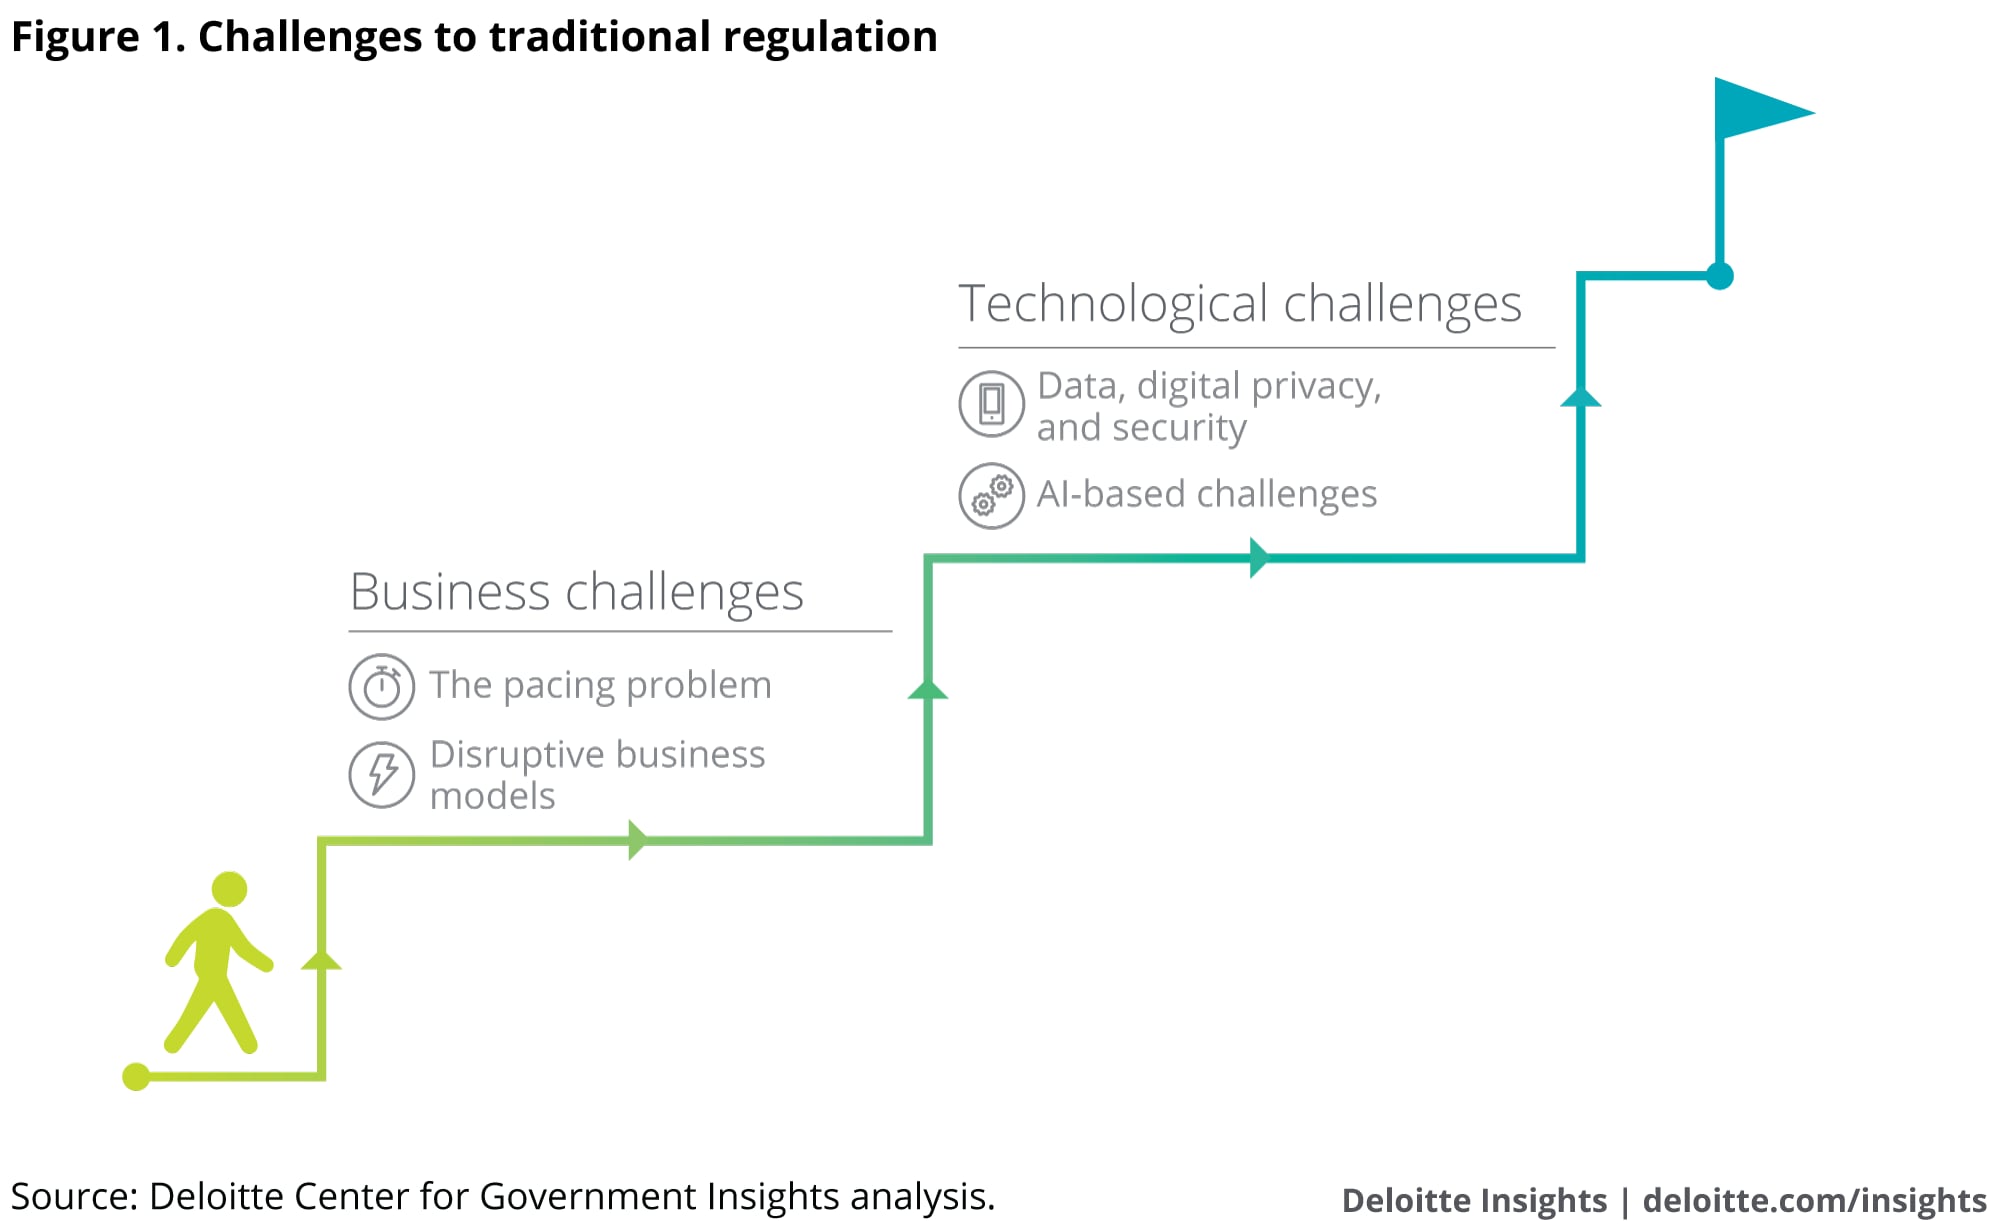 arguments against government regulation of business